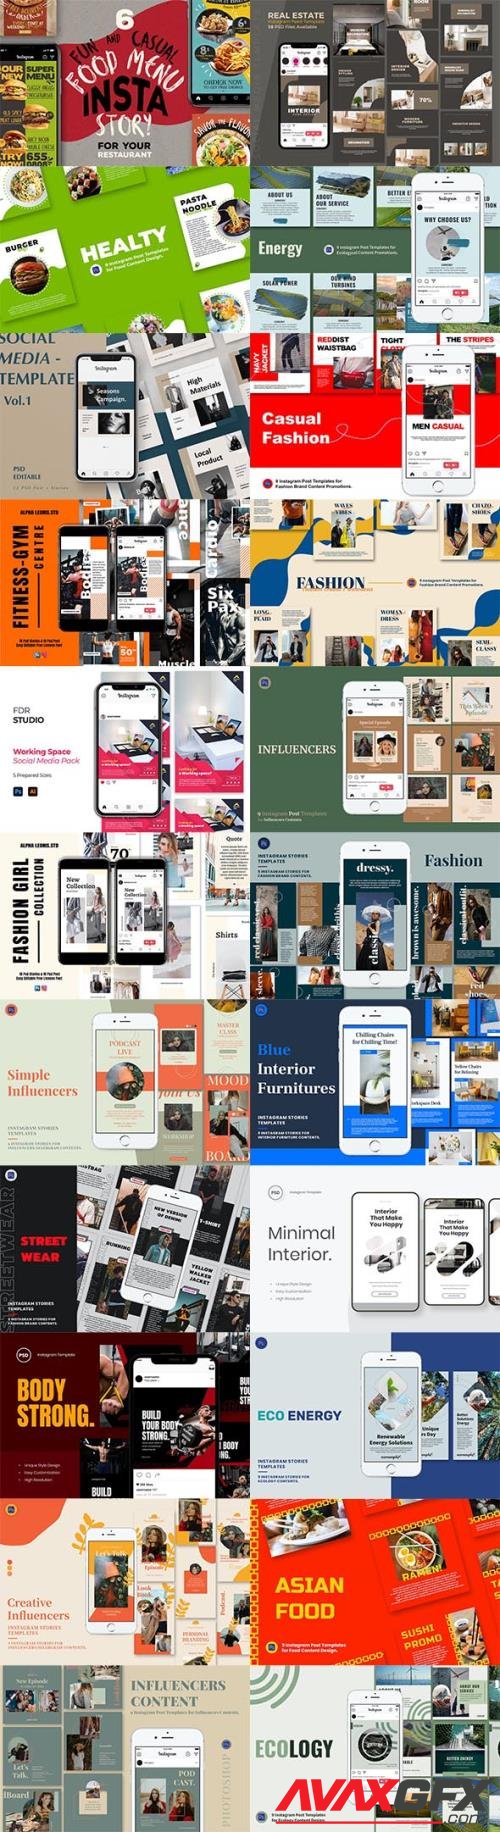 Instagram Posts and Stories Templates Pack